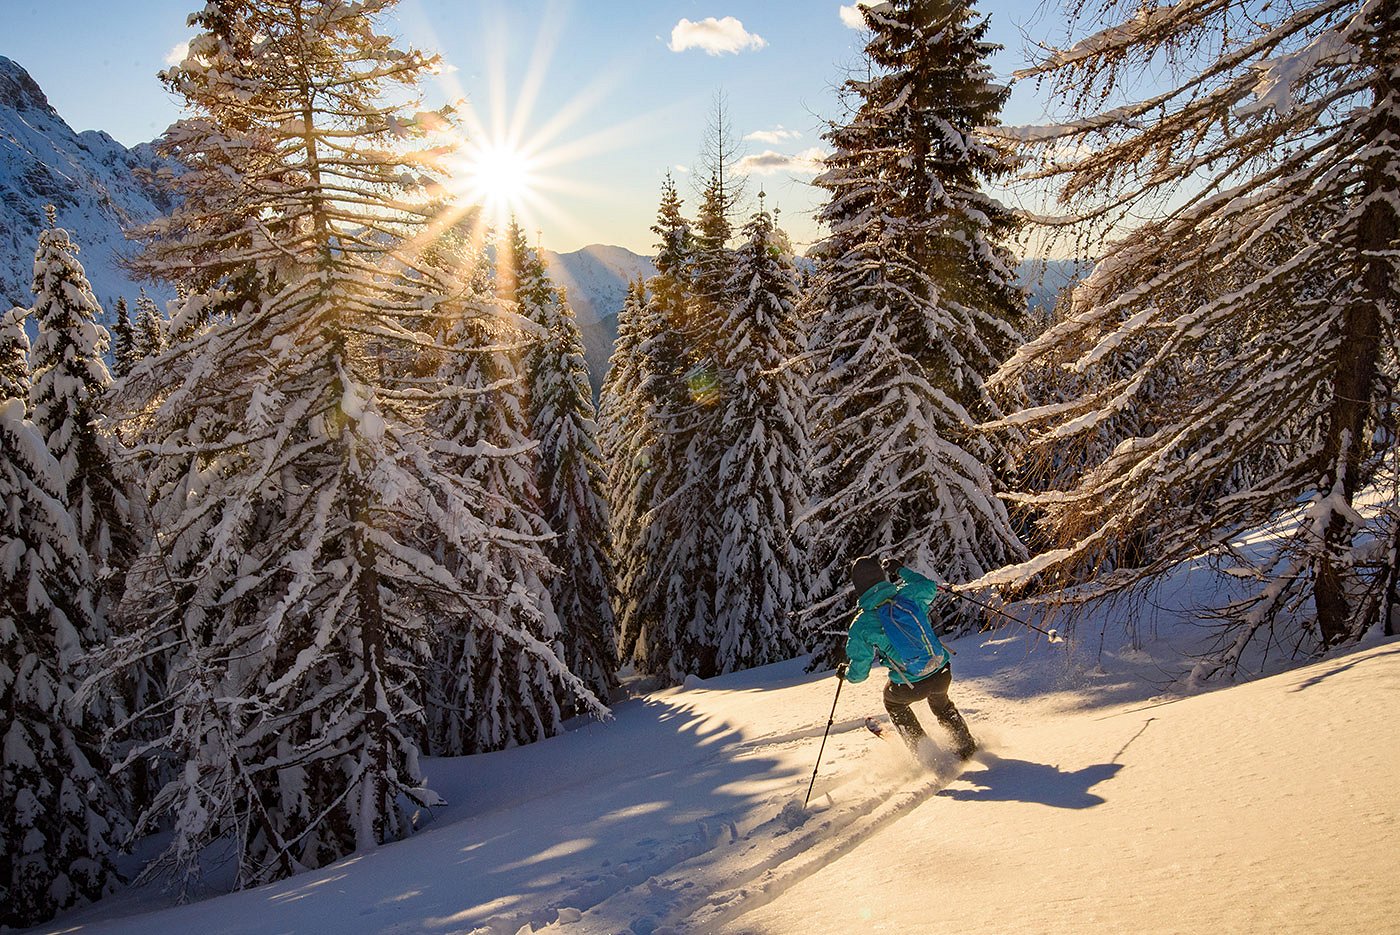 A touring skier descends through a snowy forest at sunset